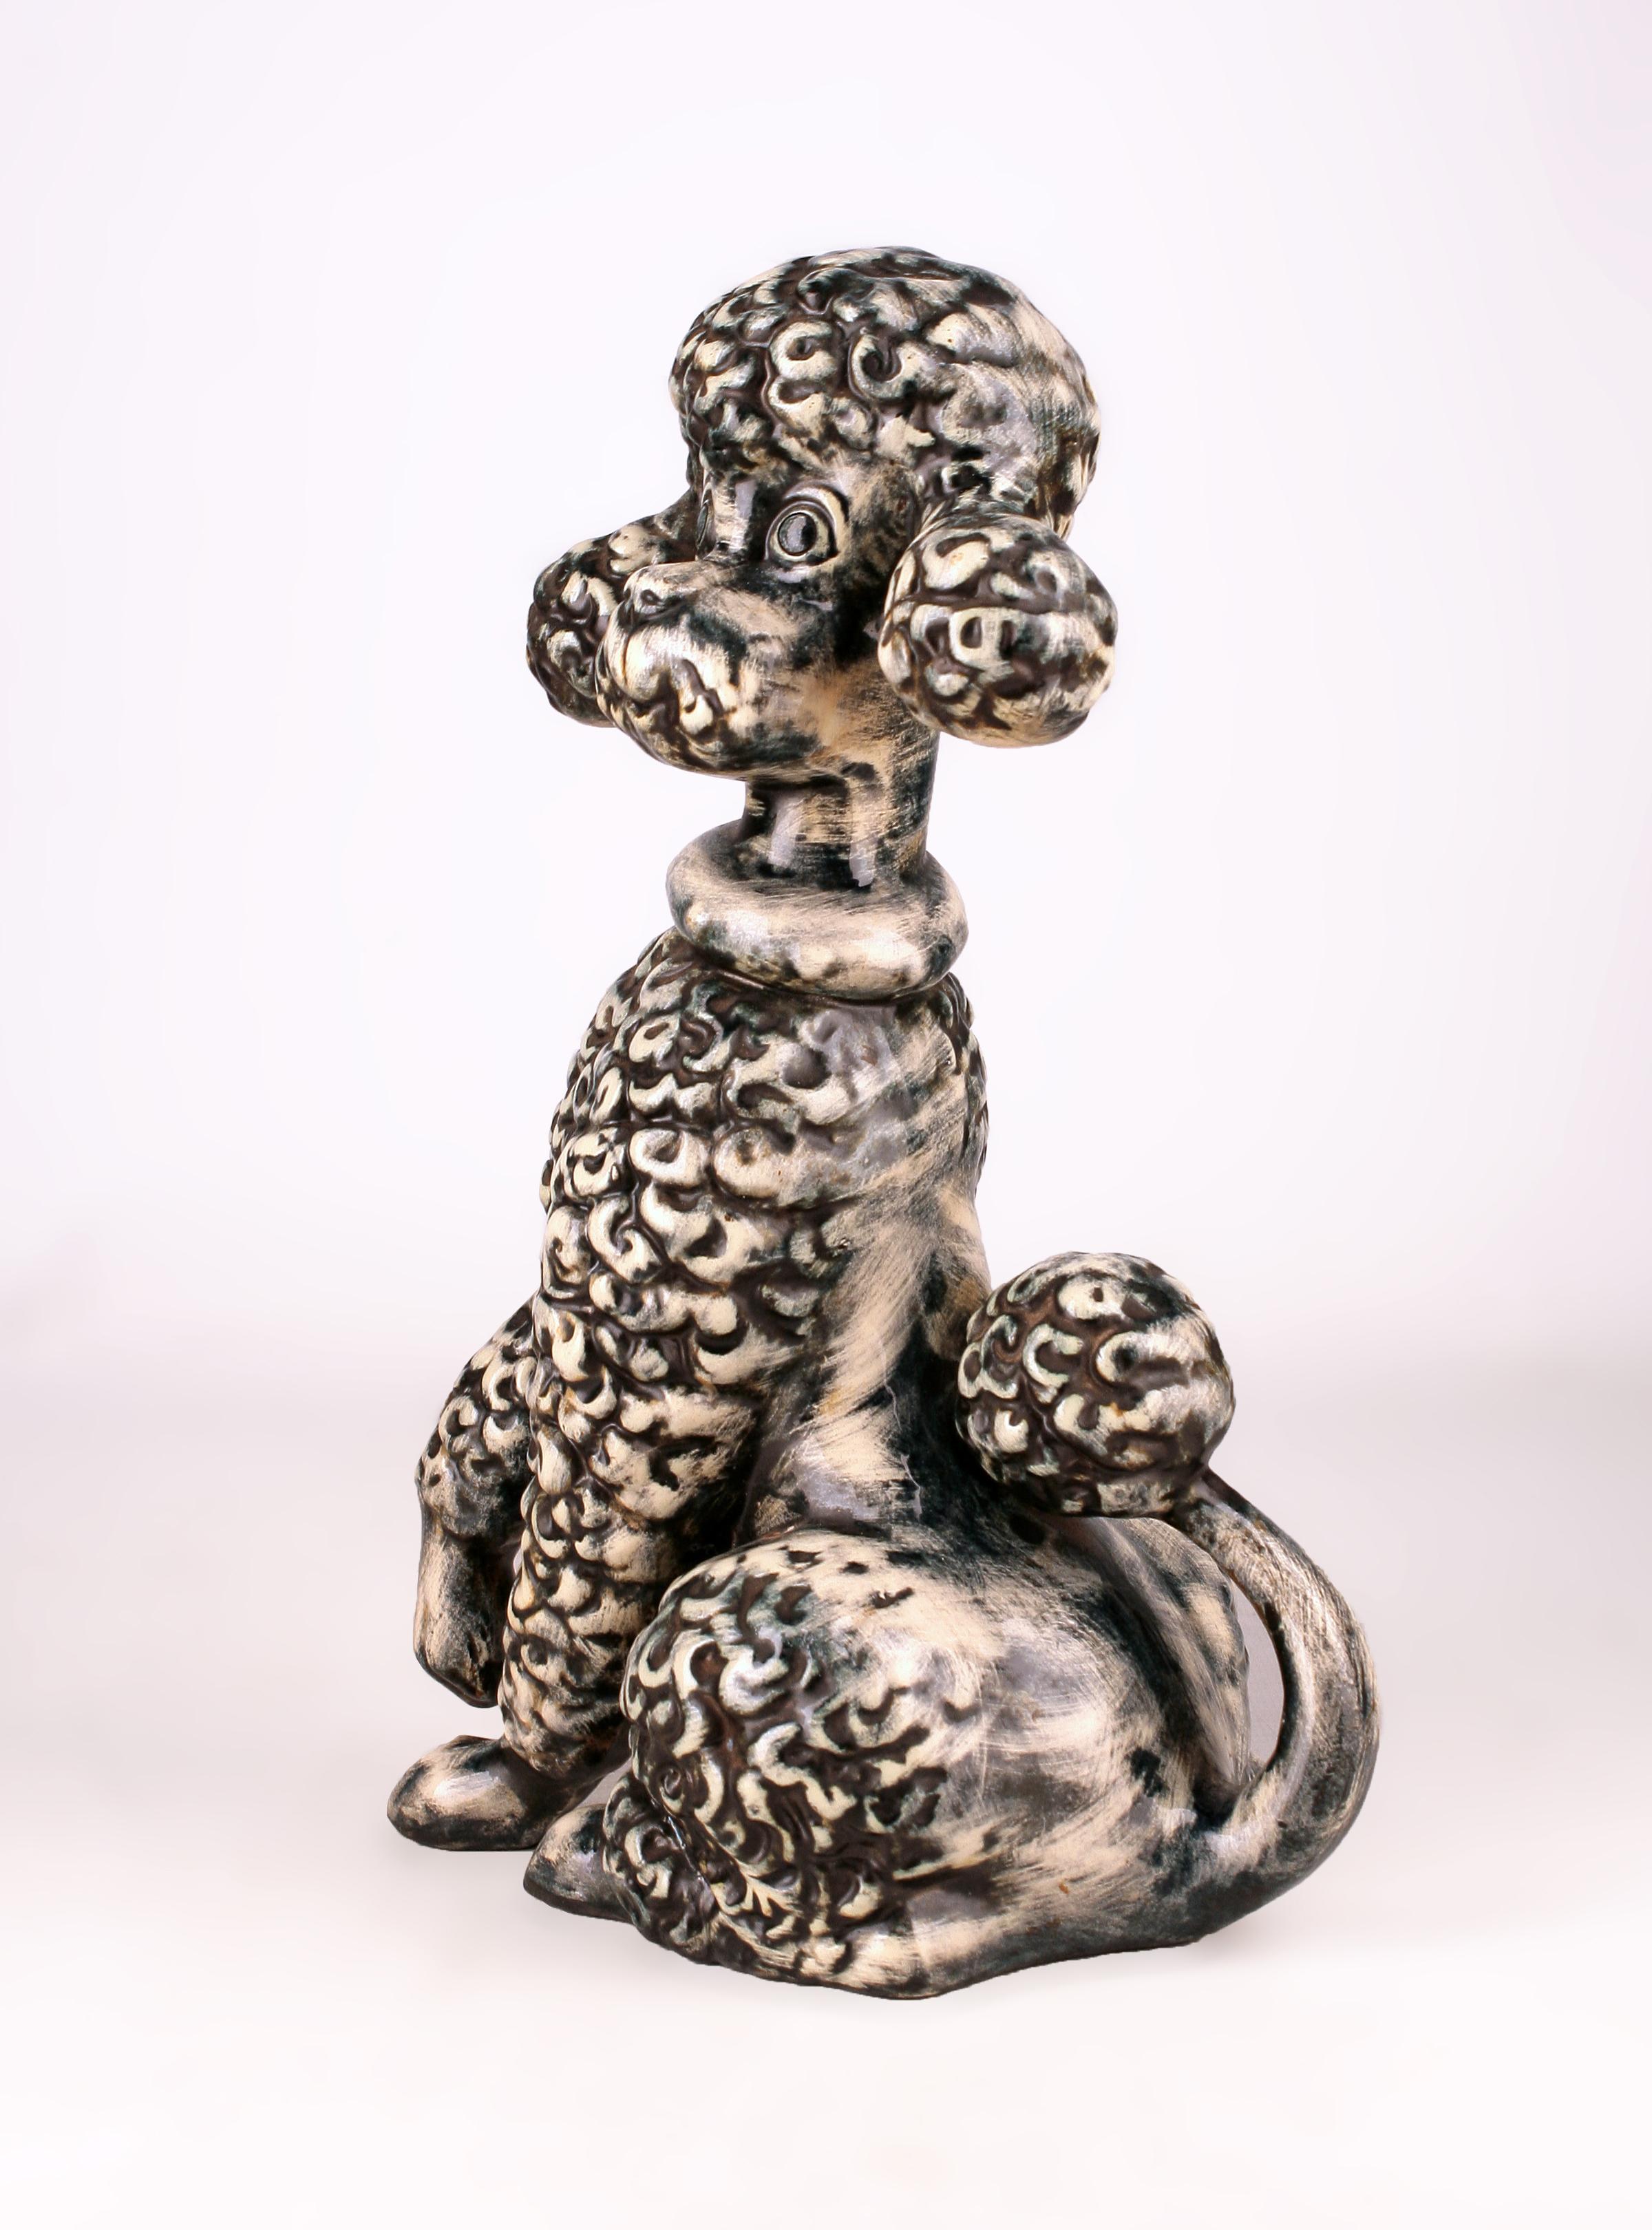 Mid-Century Modern 20th Century French Painted Ceramic Figure of a Poodle/Dog by Atelier Primavera For Sale